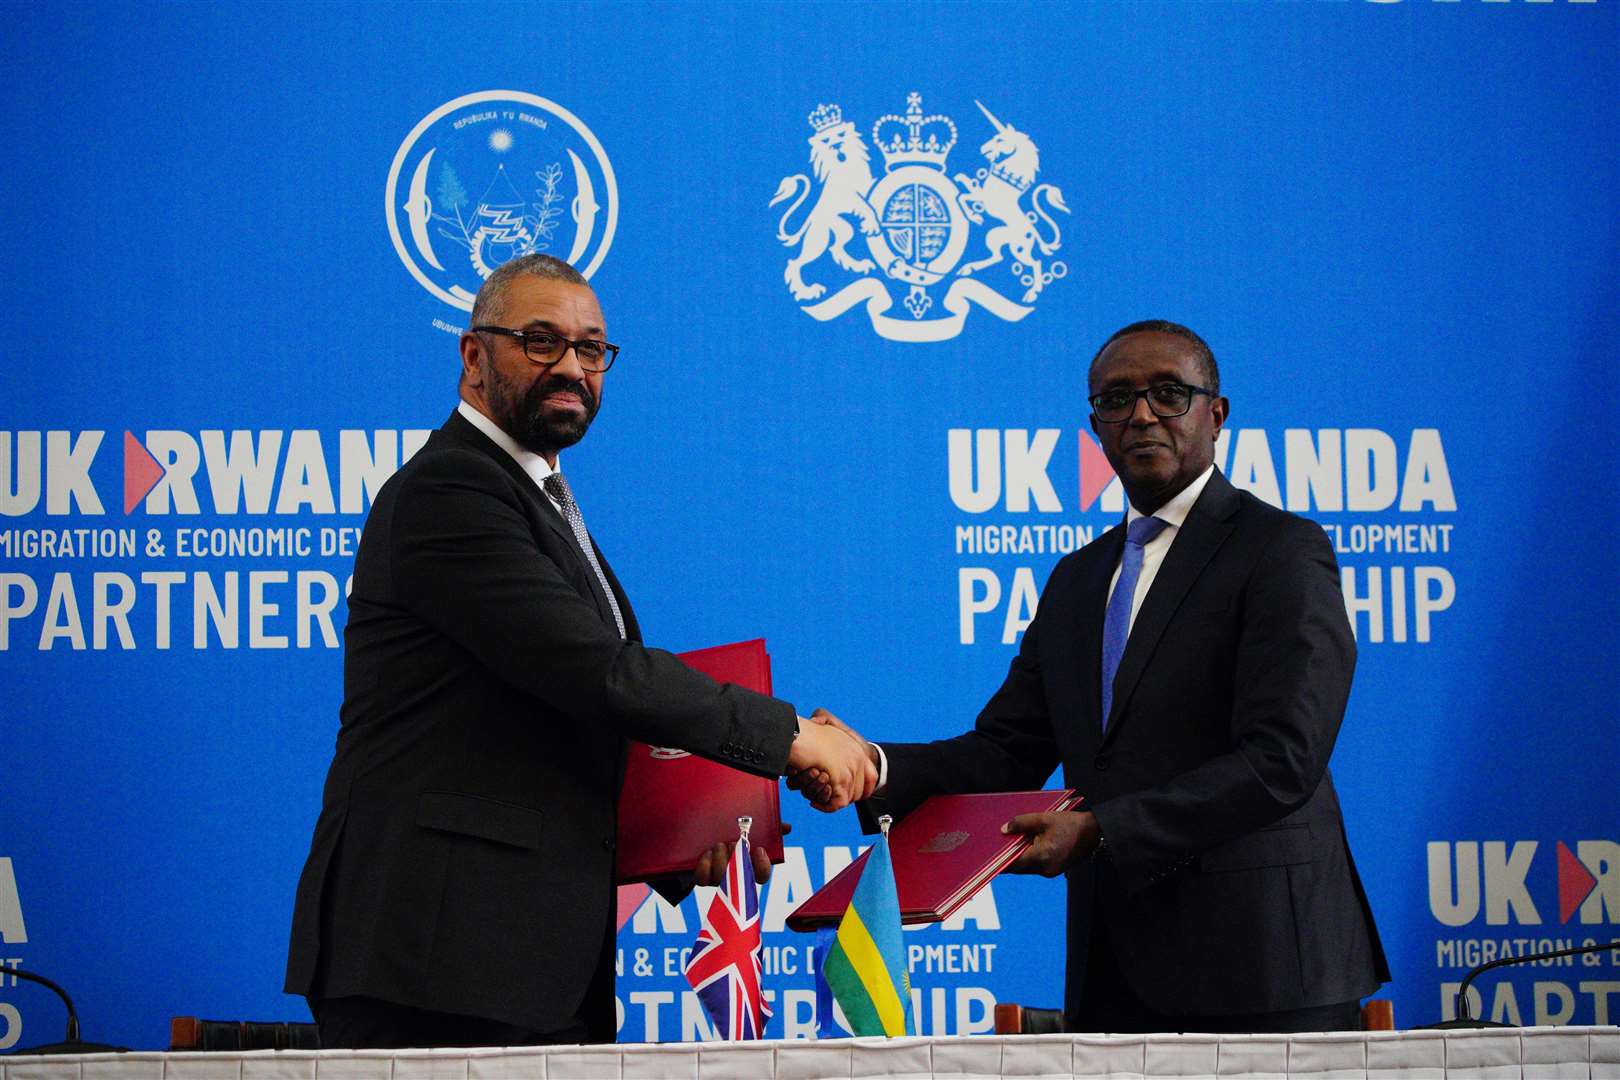 James Cleverly signed a new treaty with Rwanda on a visit to Kigali, hoping to address the Supreme Court’s concerns (PA)